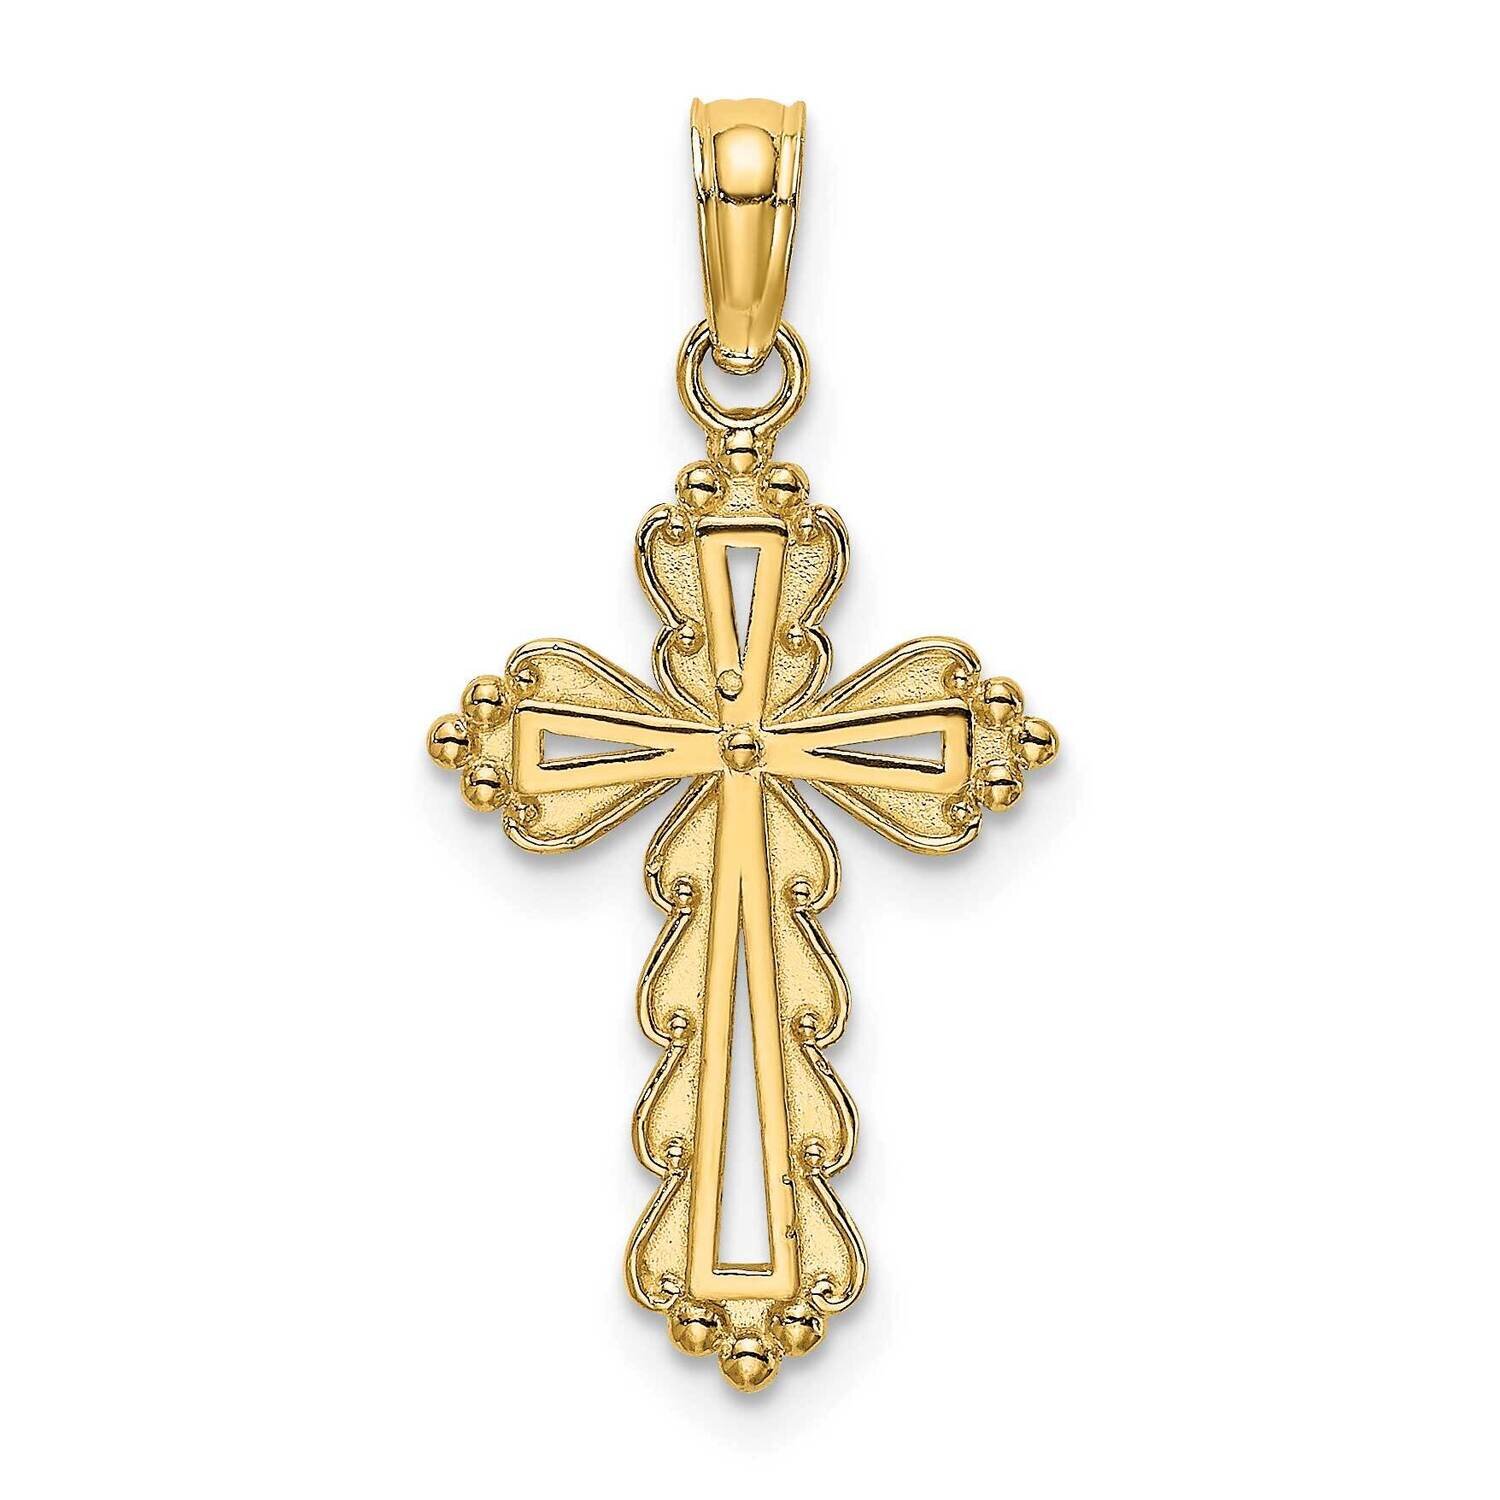 Scalloped Cross with Cut-Out Center Charm 14k Gold K8551